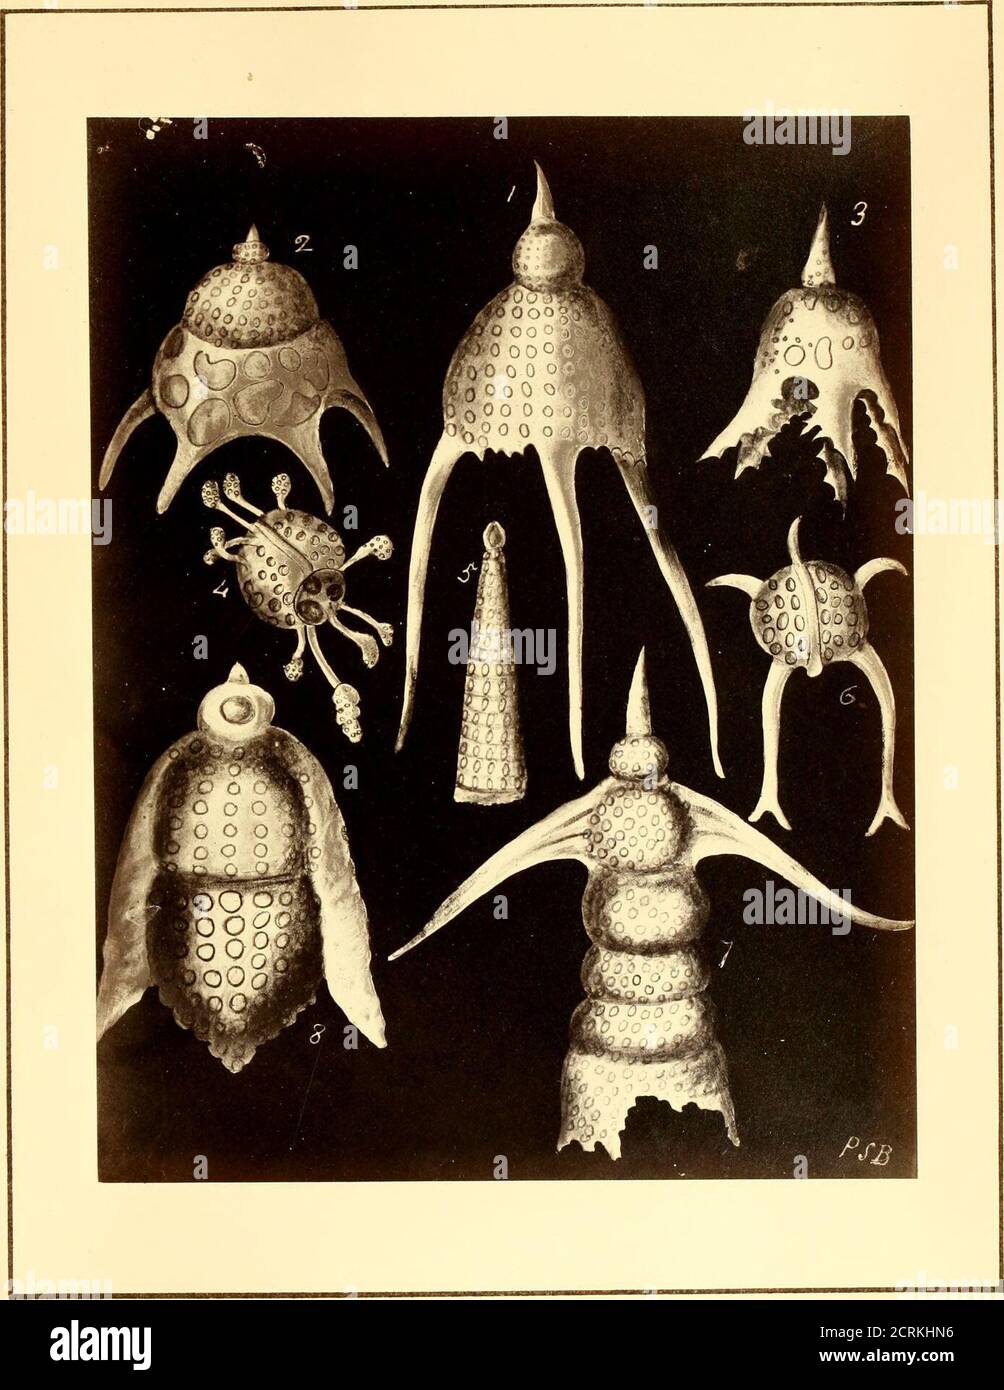 . Polycystins, figures of remarkable forms &c. in the Barbados chalk deposit (chiefly collected by Dr. Davy, and noticed in a lecture delivered to the Agricultural Society of Barbados, in July, 1846) . PLATE XVn. riG. 1.—Lithornithium Hirimdo of Ehrenberg, Mik., PL XIX, fig. 53, but this is a much finer and more perfect specimen ; frequent in the Barbados deposit: size very variable. 2.—A broad and stunted variety of Podocyrtis Schomburgkii. Mik.,PI. XXXVI, fig. 22. 3.—Podocyrtis (?) with five spined or serrated legs: body and sur-mounting spine all very irregularly foraminated. Measures.00462 Stock Photo